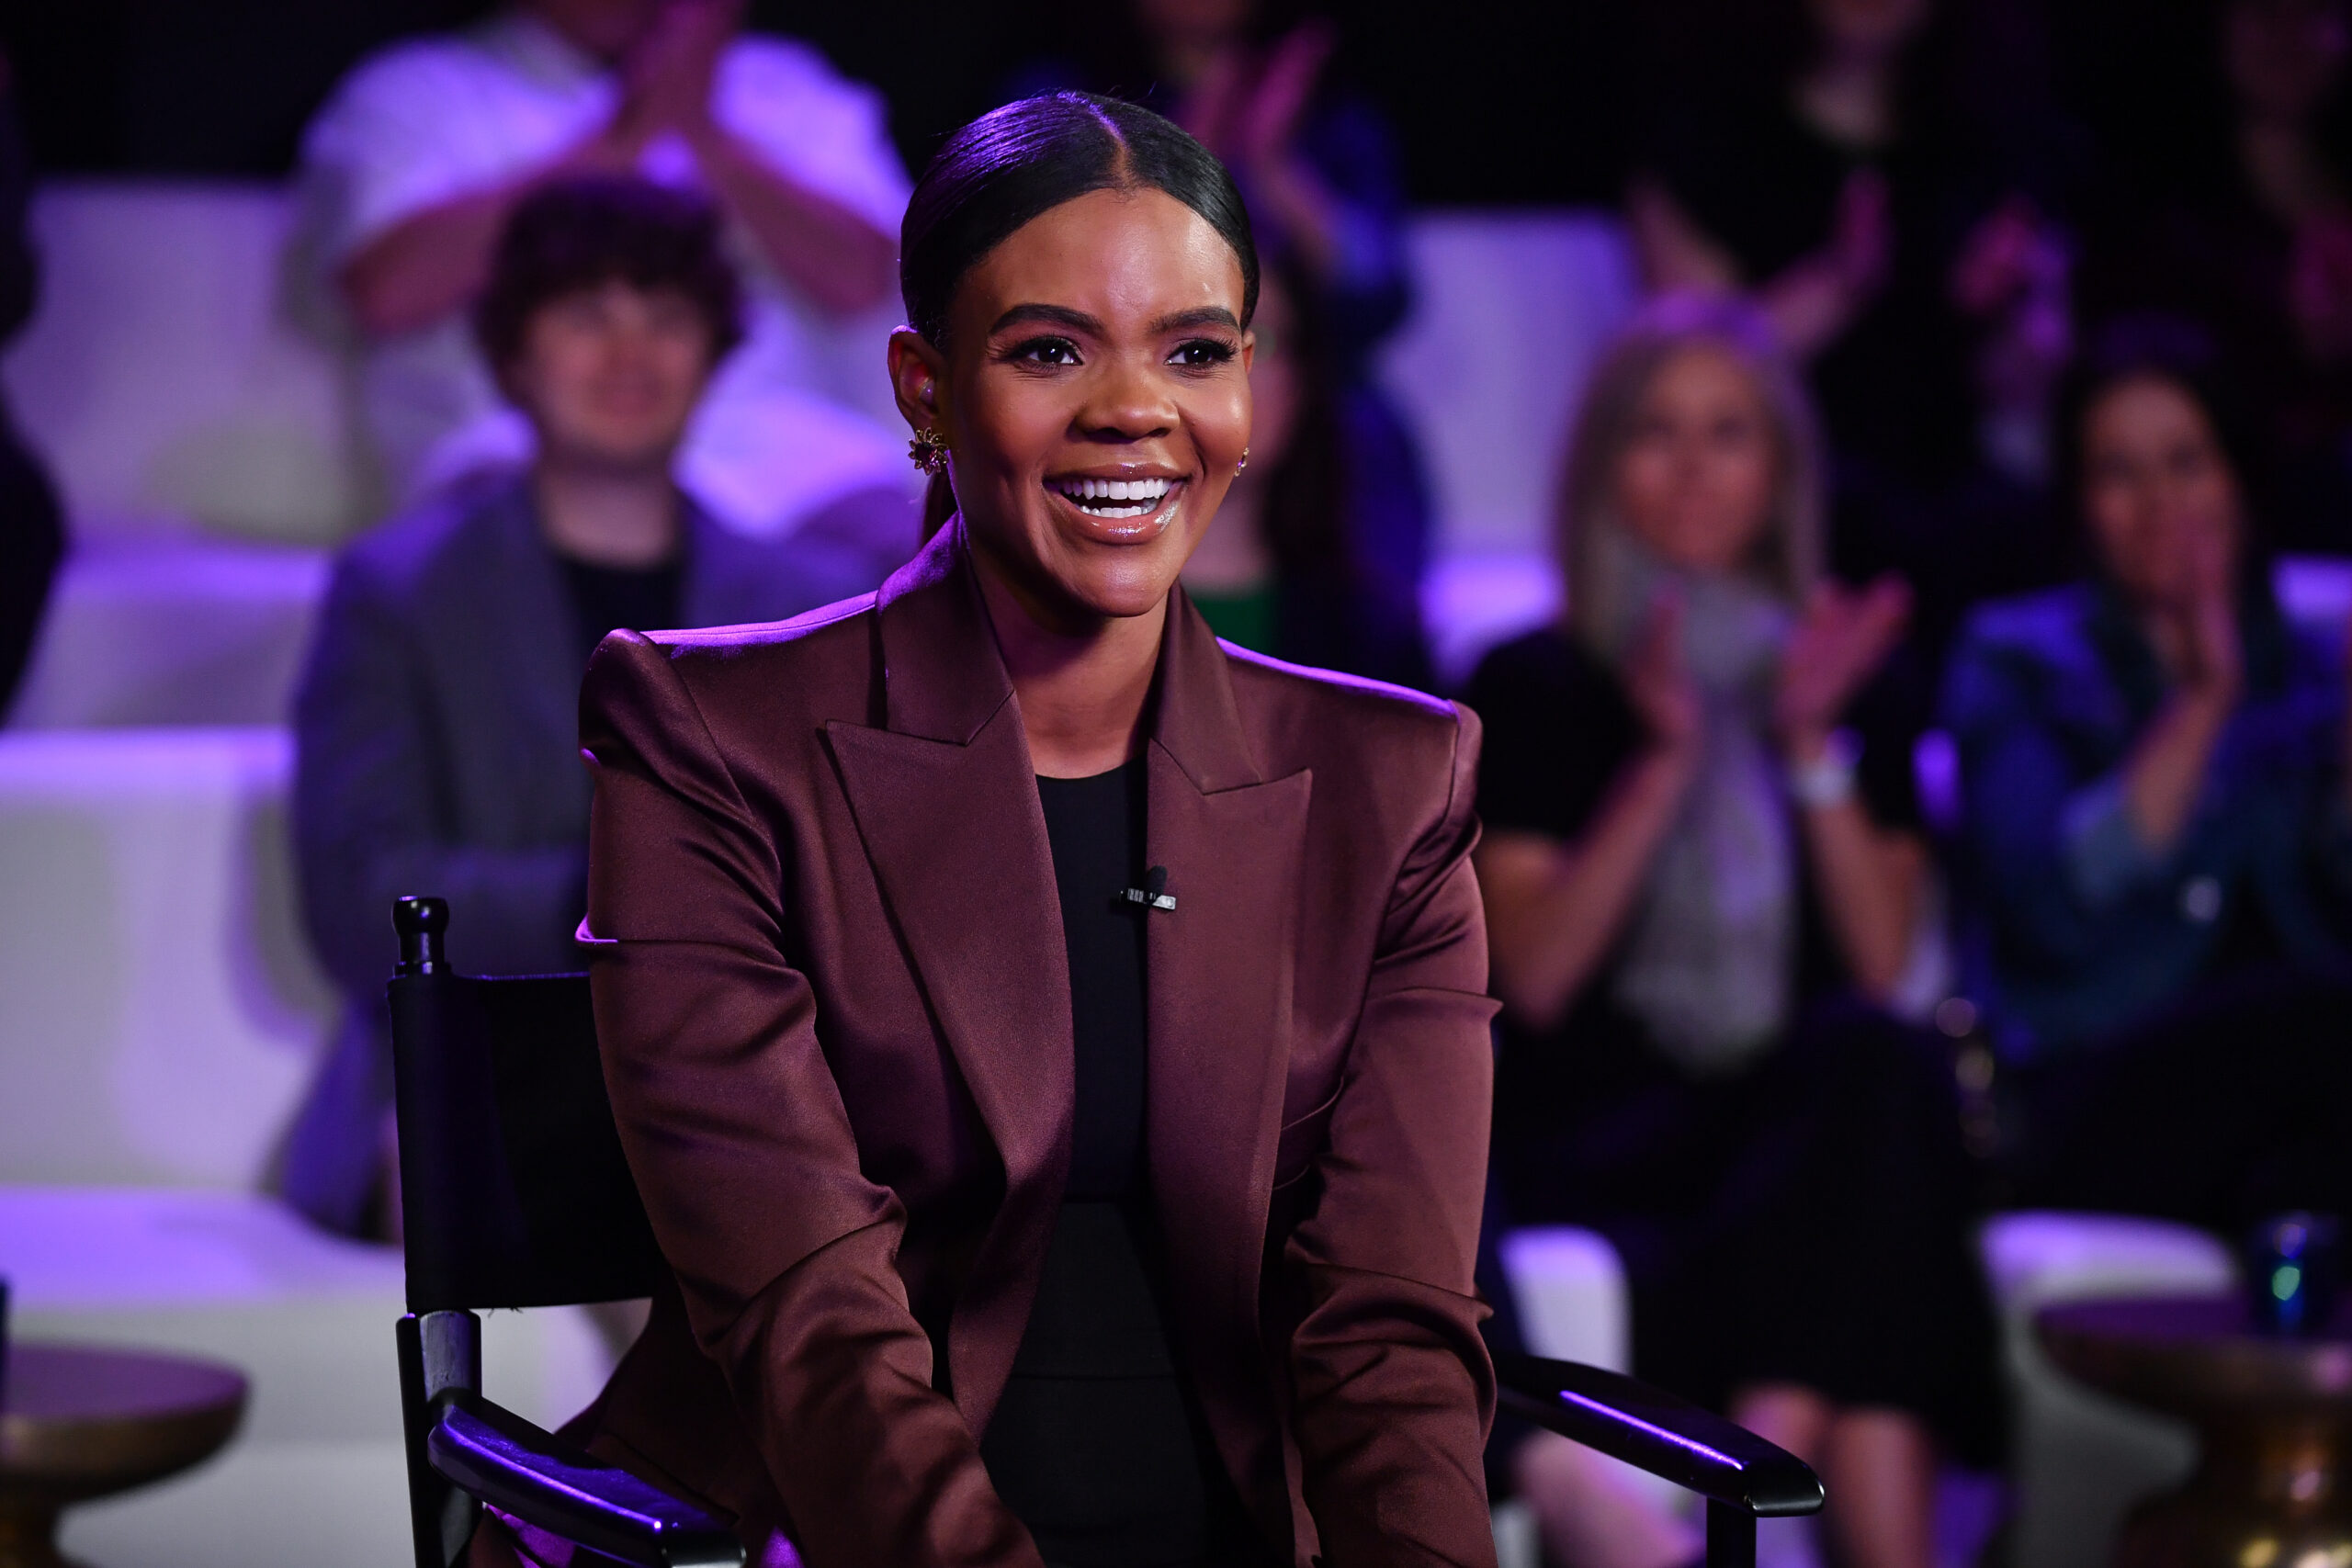 ‘I’m Giving You Actual Facts’: Candace Owens Blasts Affirmative Action In Appearance On ‘Dr. Phil’